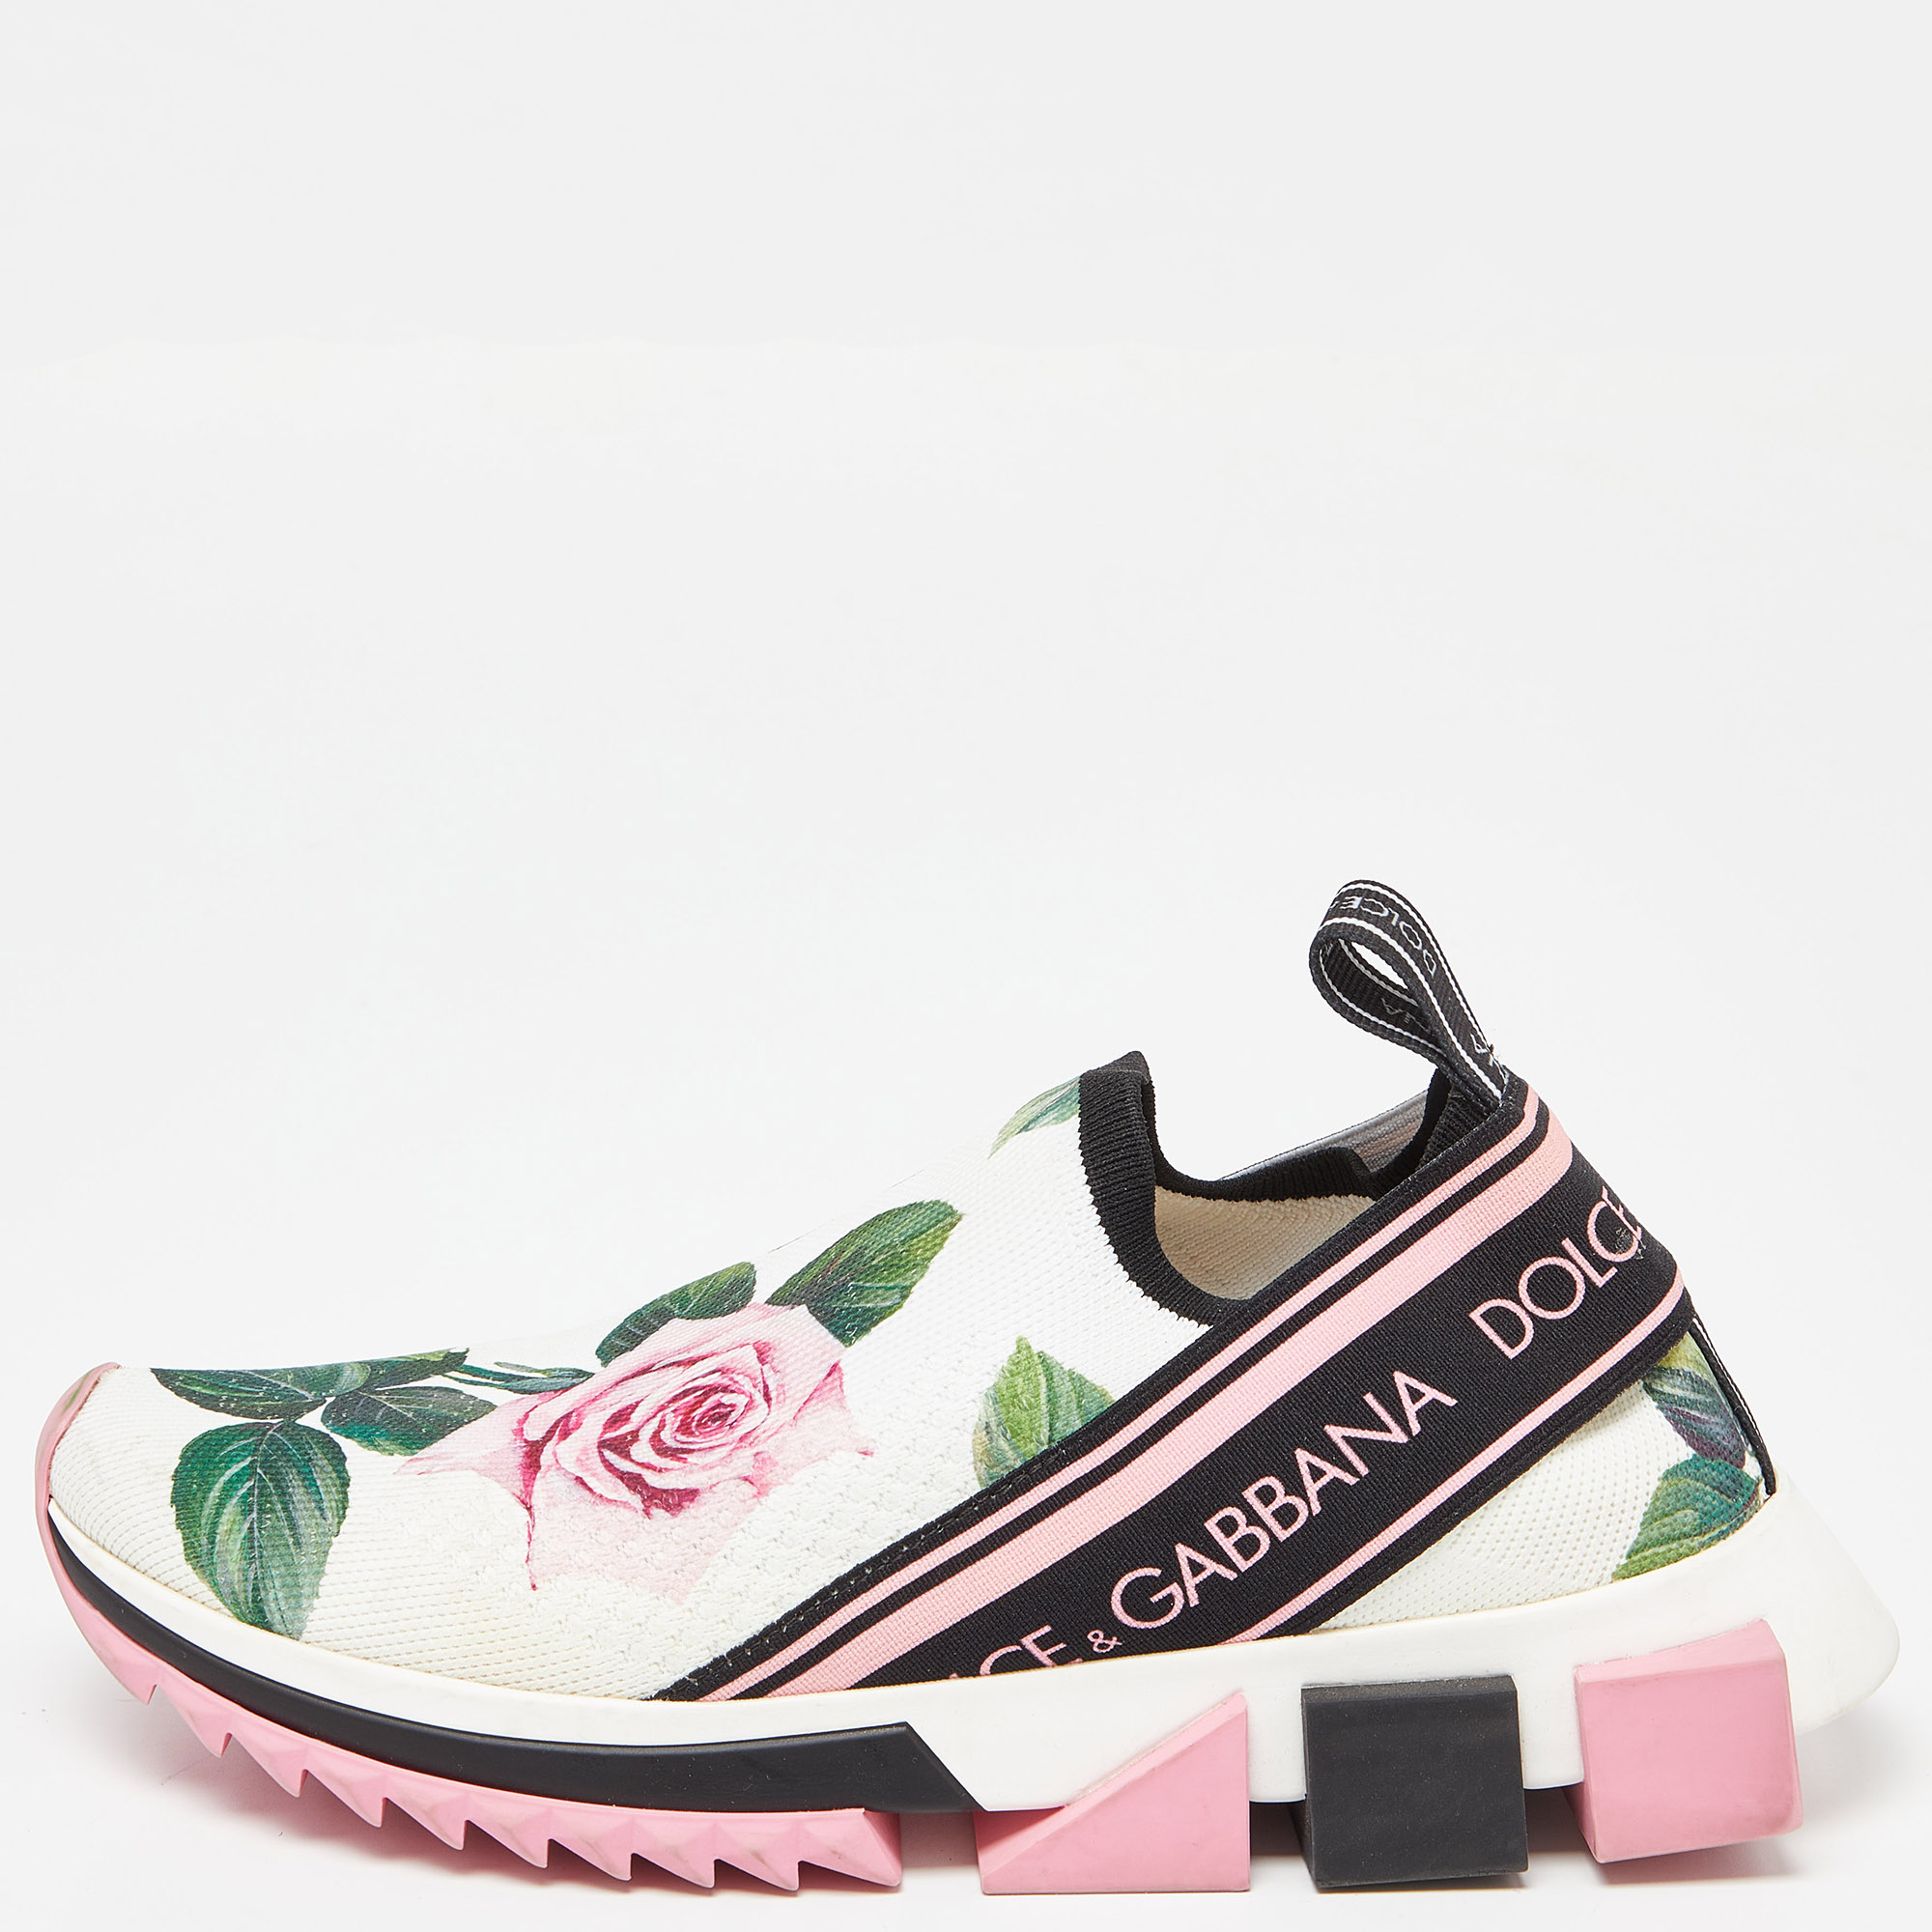 

Dolce & Gabbana Tricolor Floral Print Canvas Sorrento Sneakers Size, White